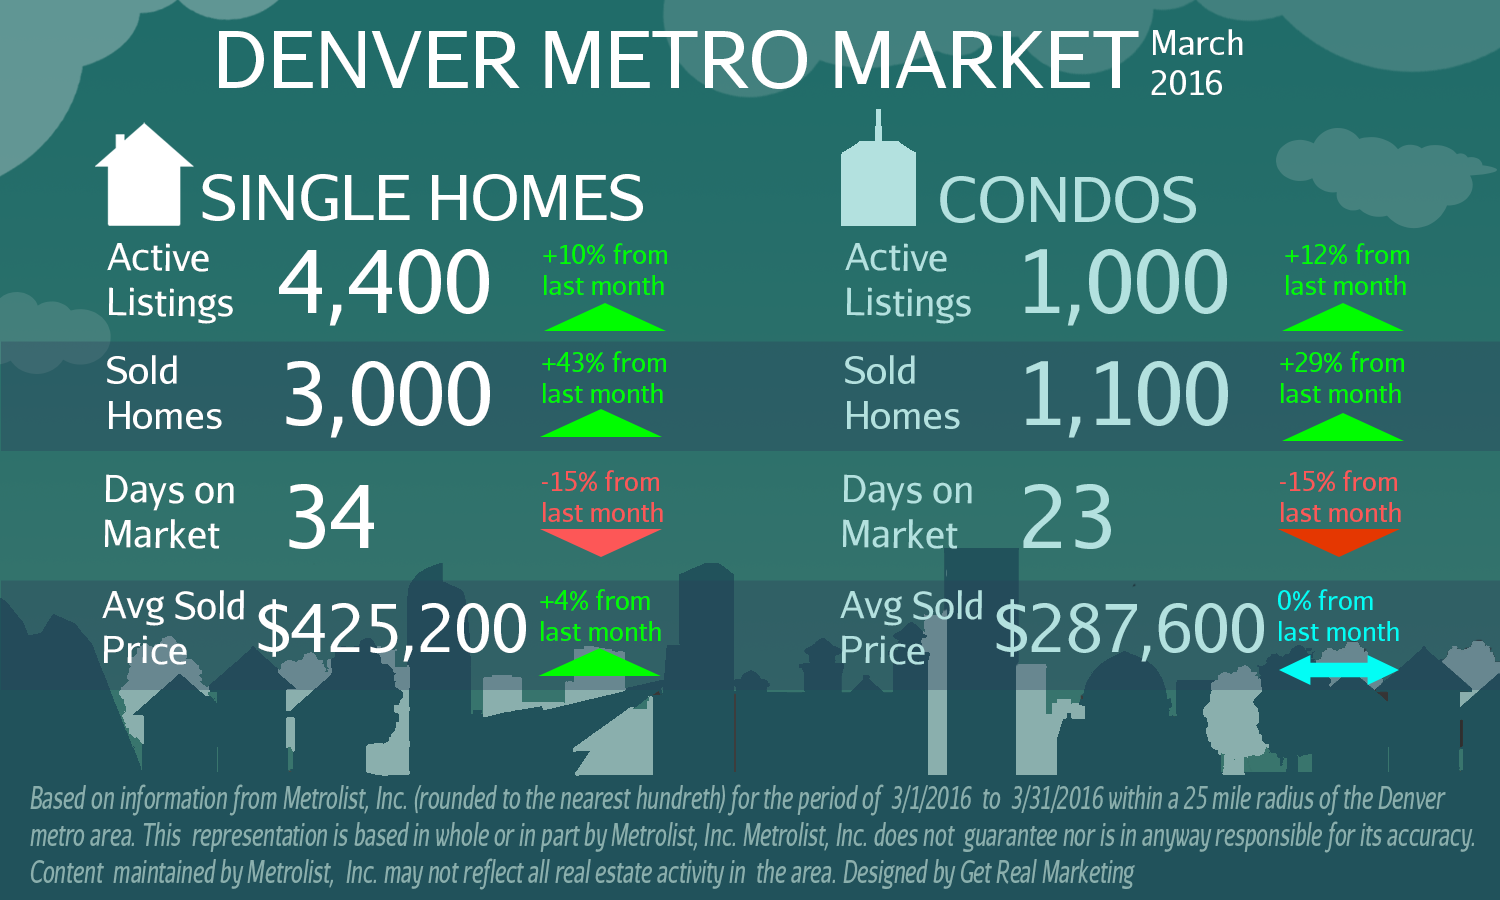 Sold Homes ROCKET In March!